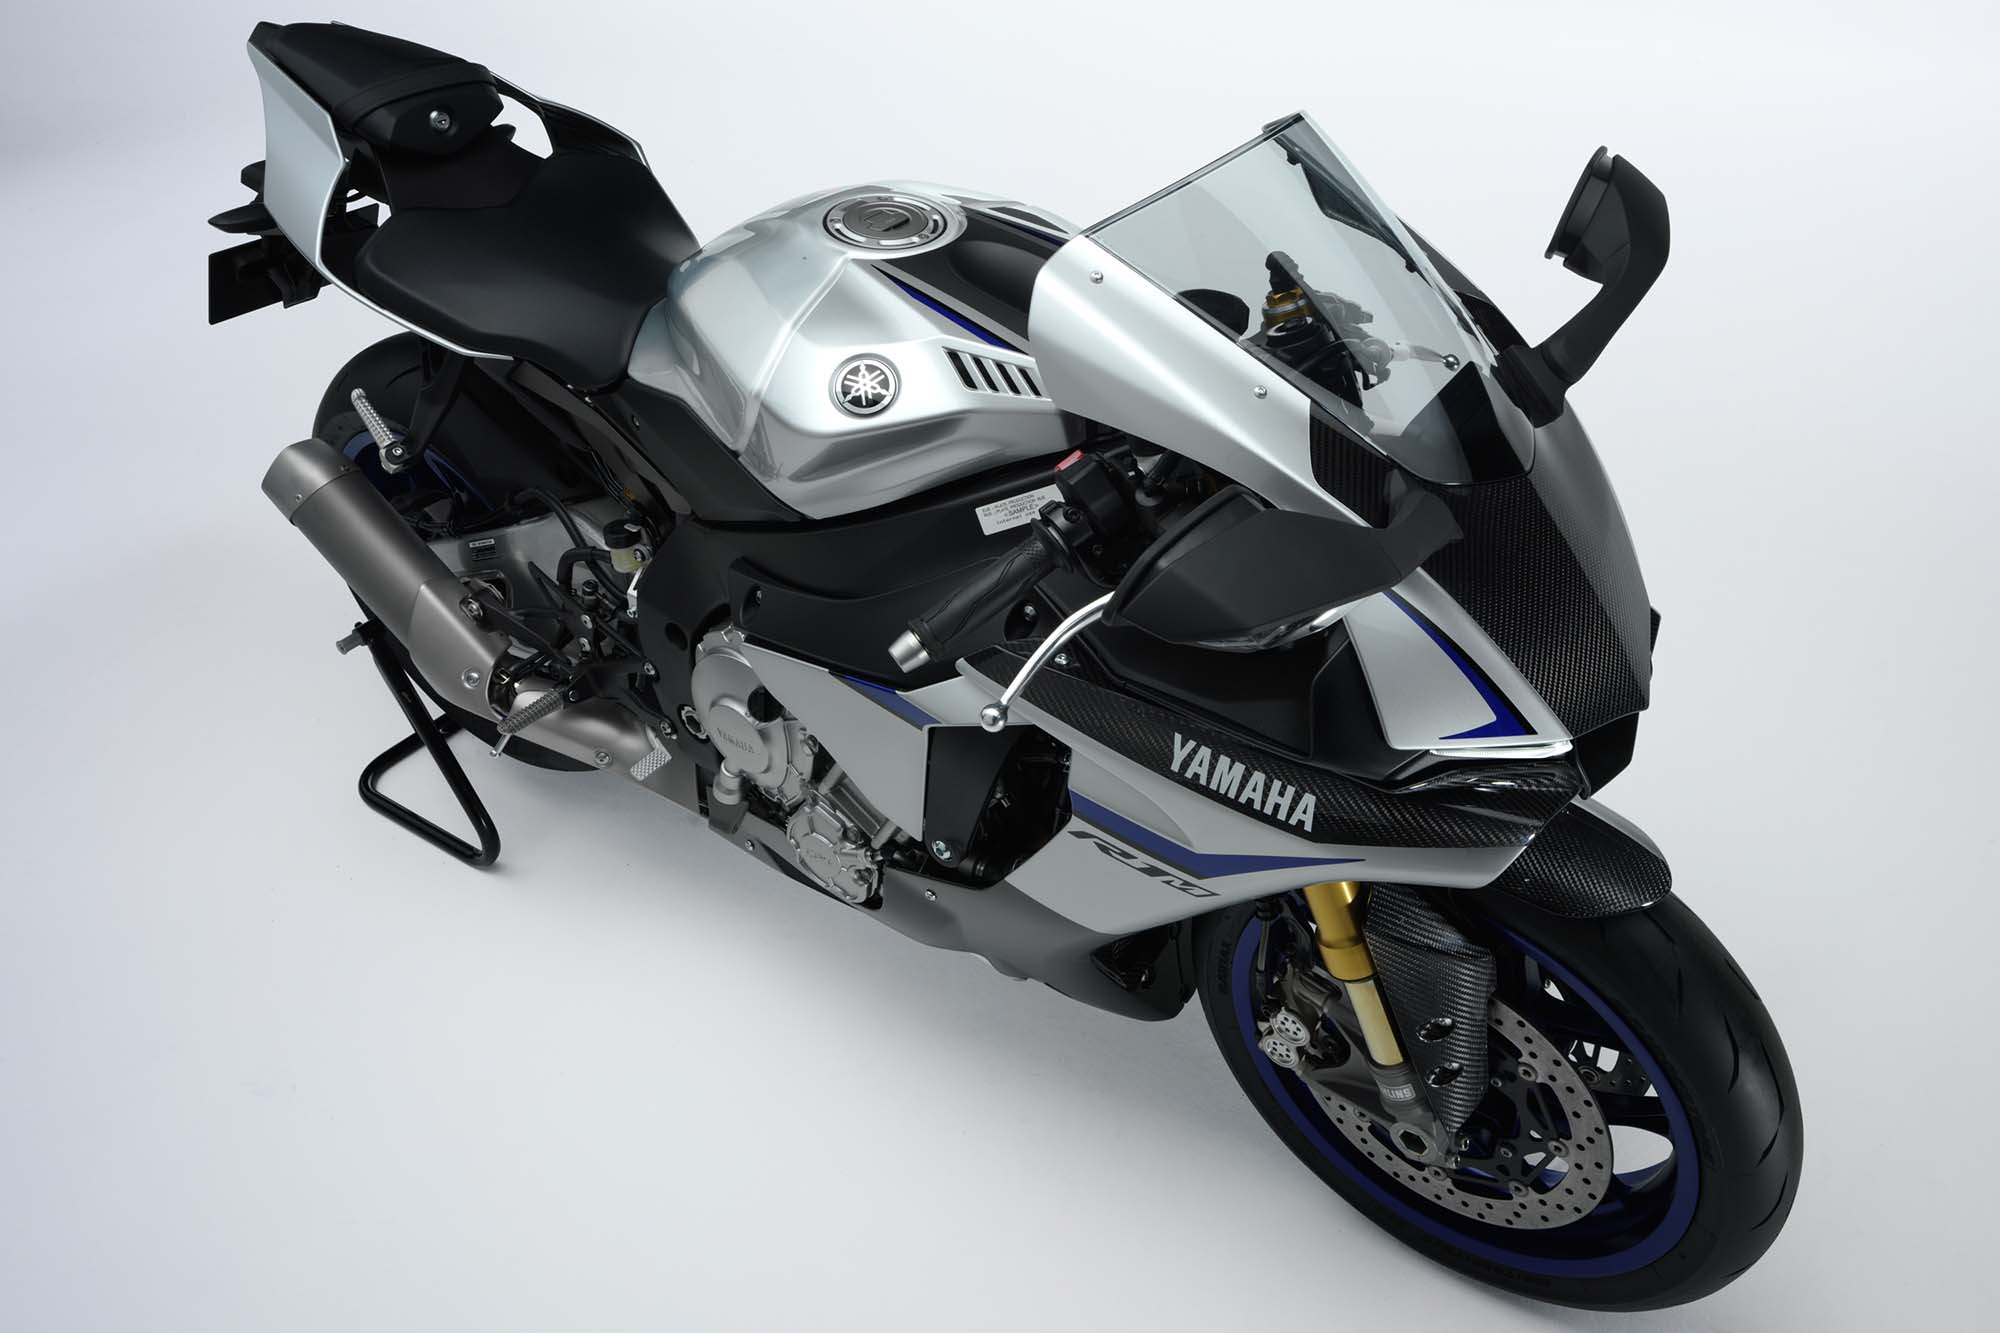 2015 Yamaha YZF-R1M - An Exclusive Track Weapon - Asphalt & Rubber